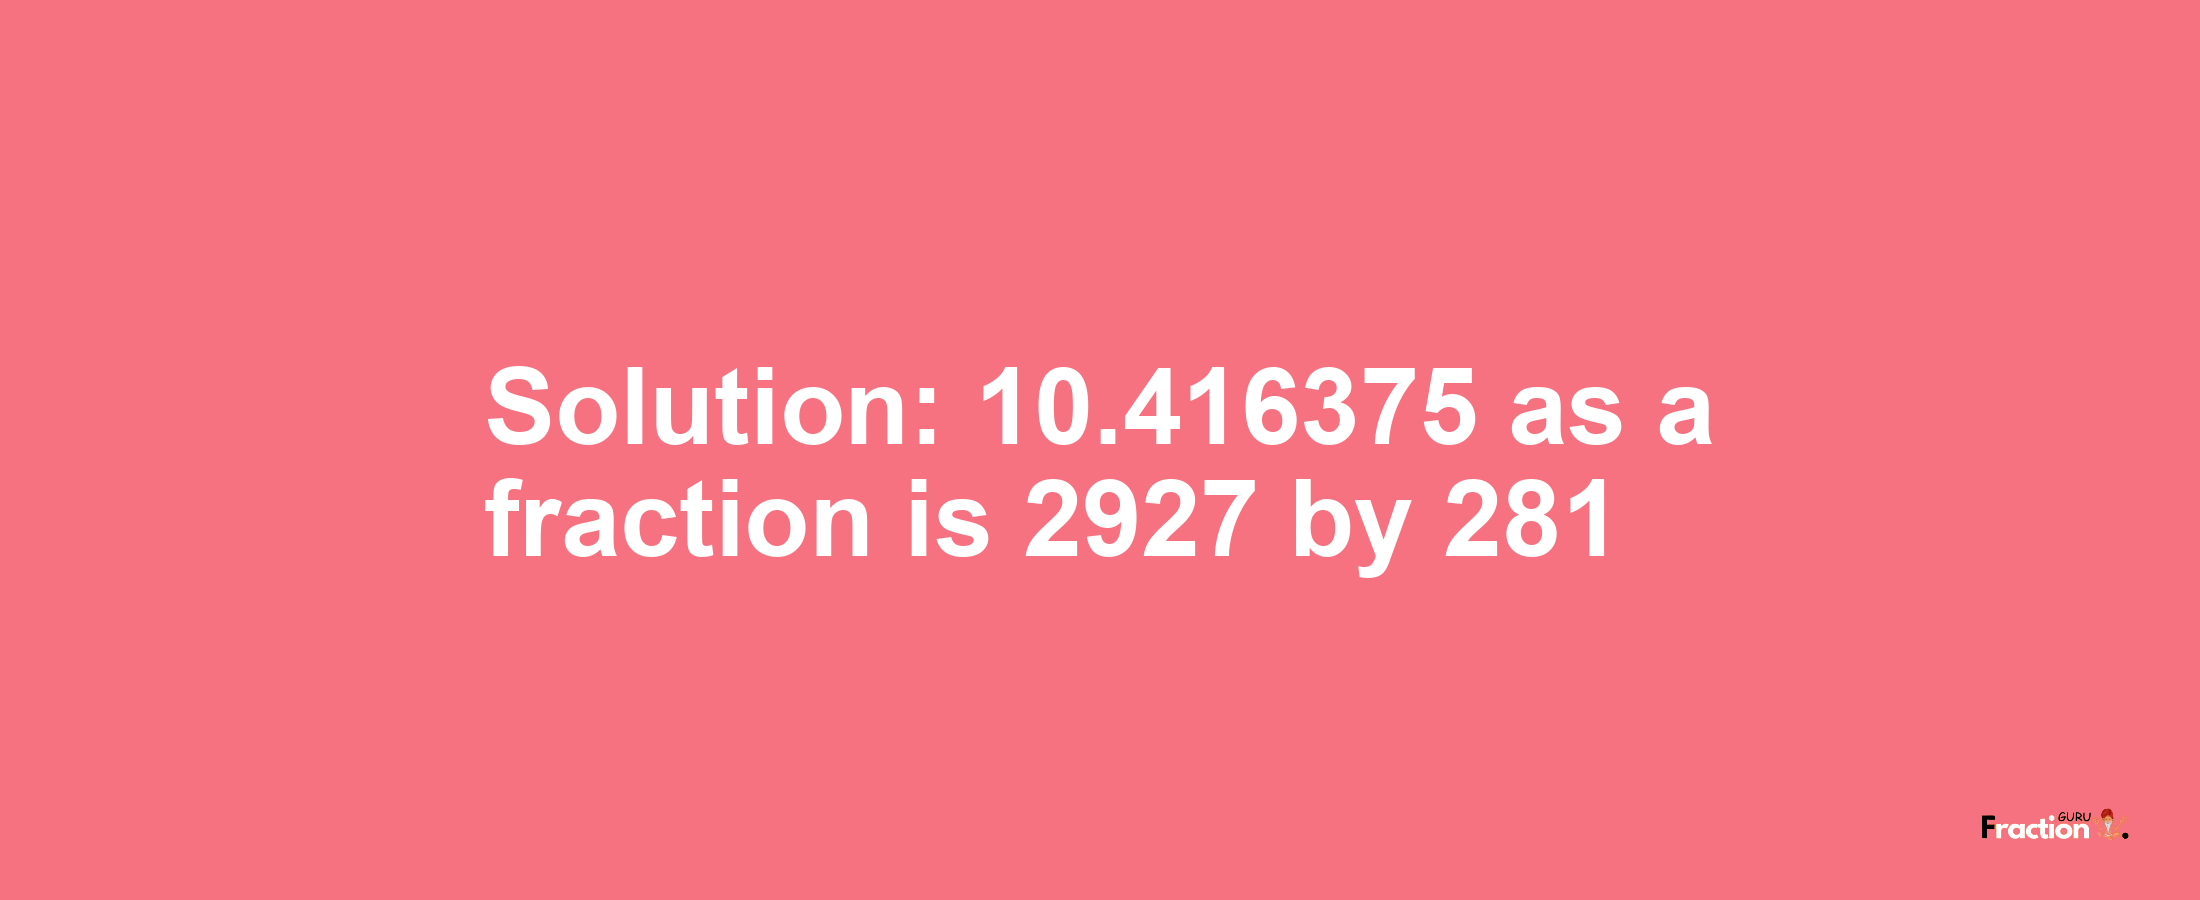 Solution:10.416375 as a fraction is 2927/281